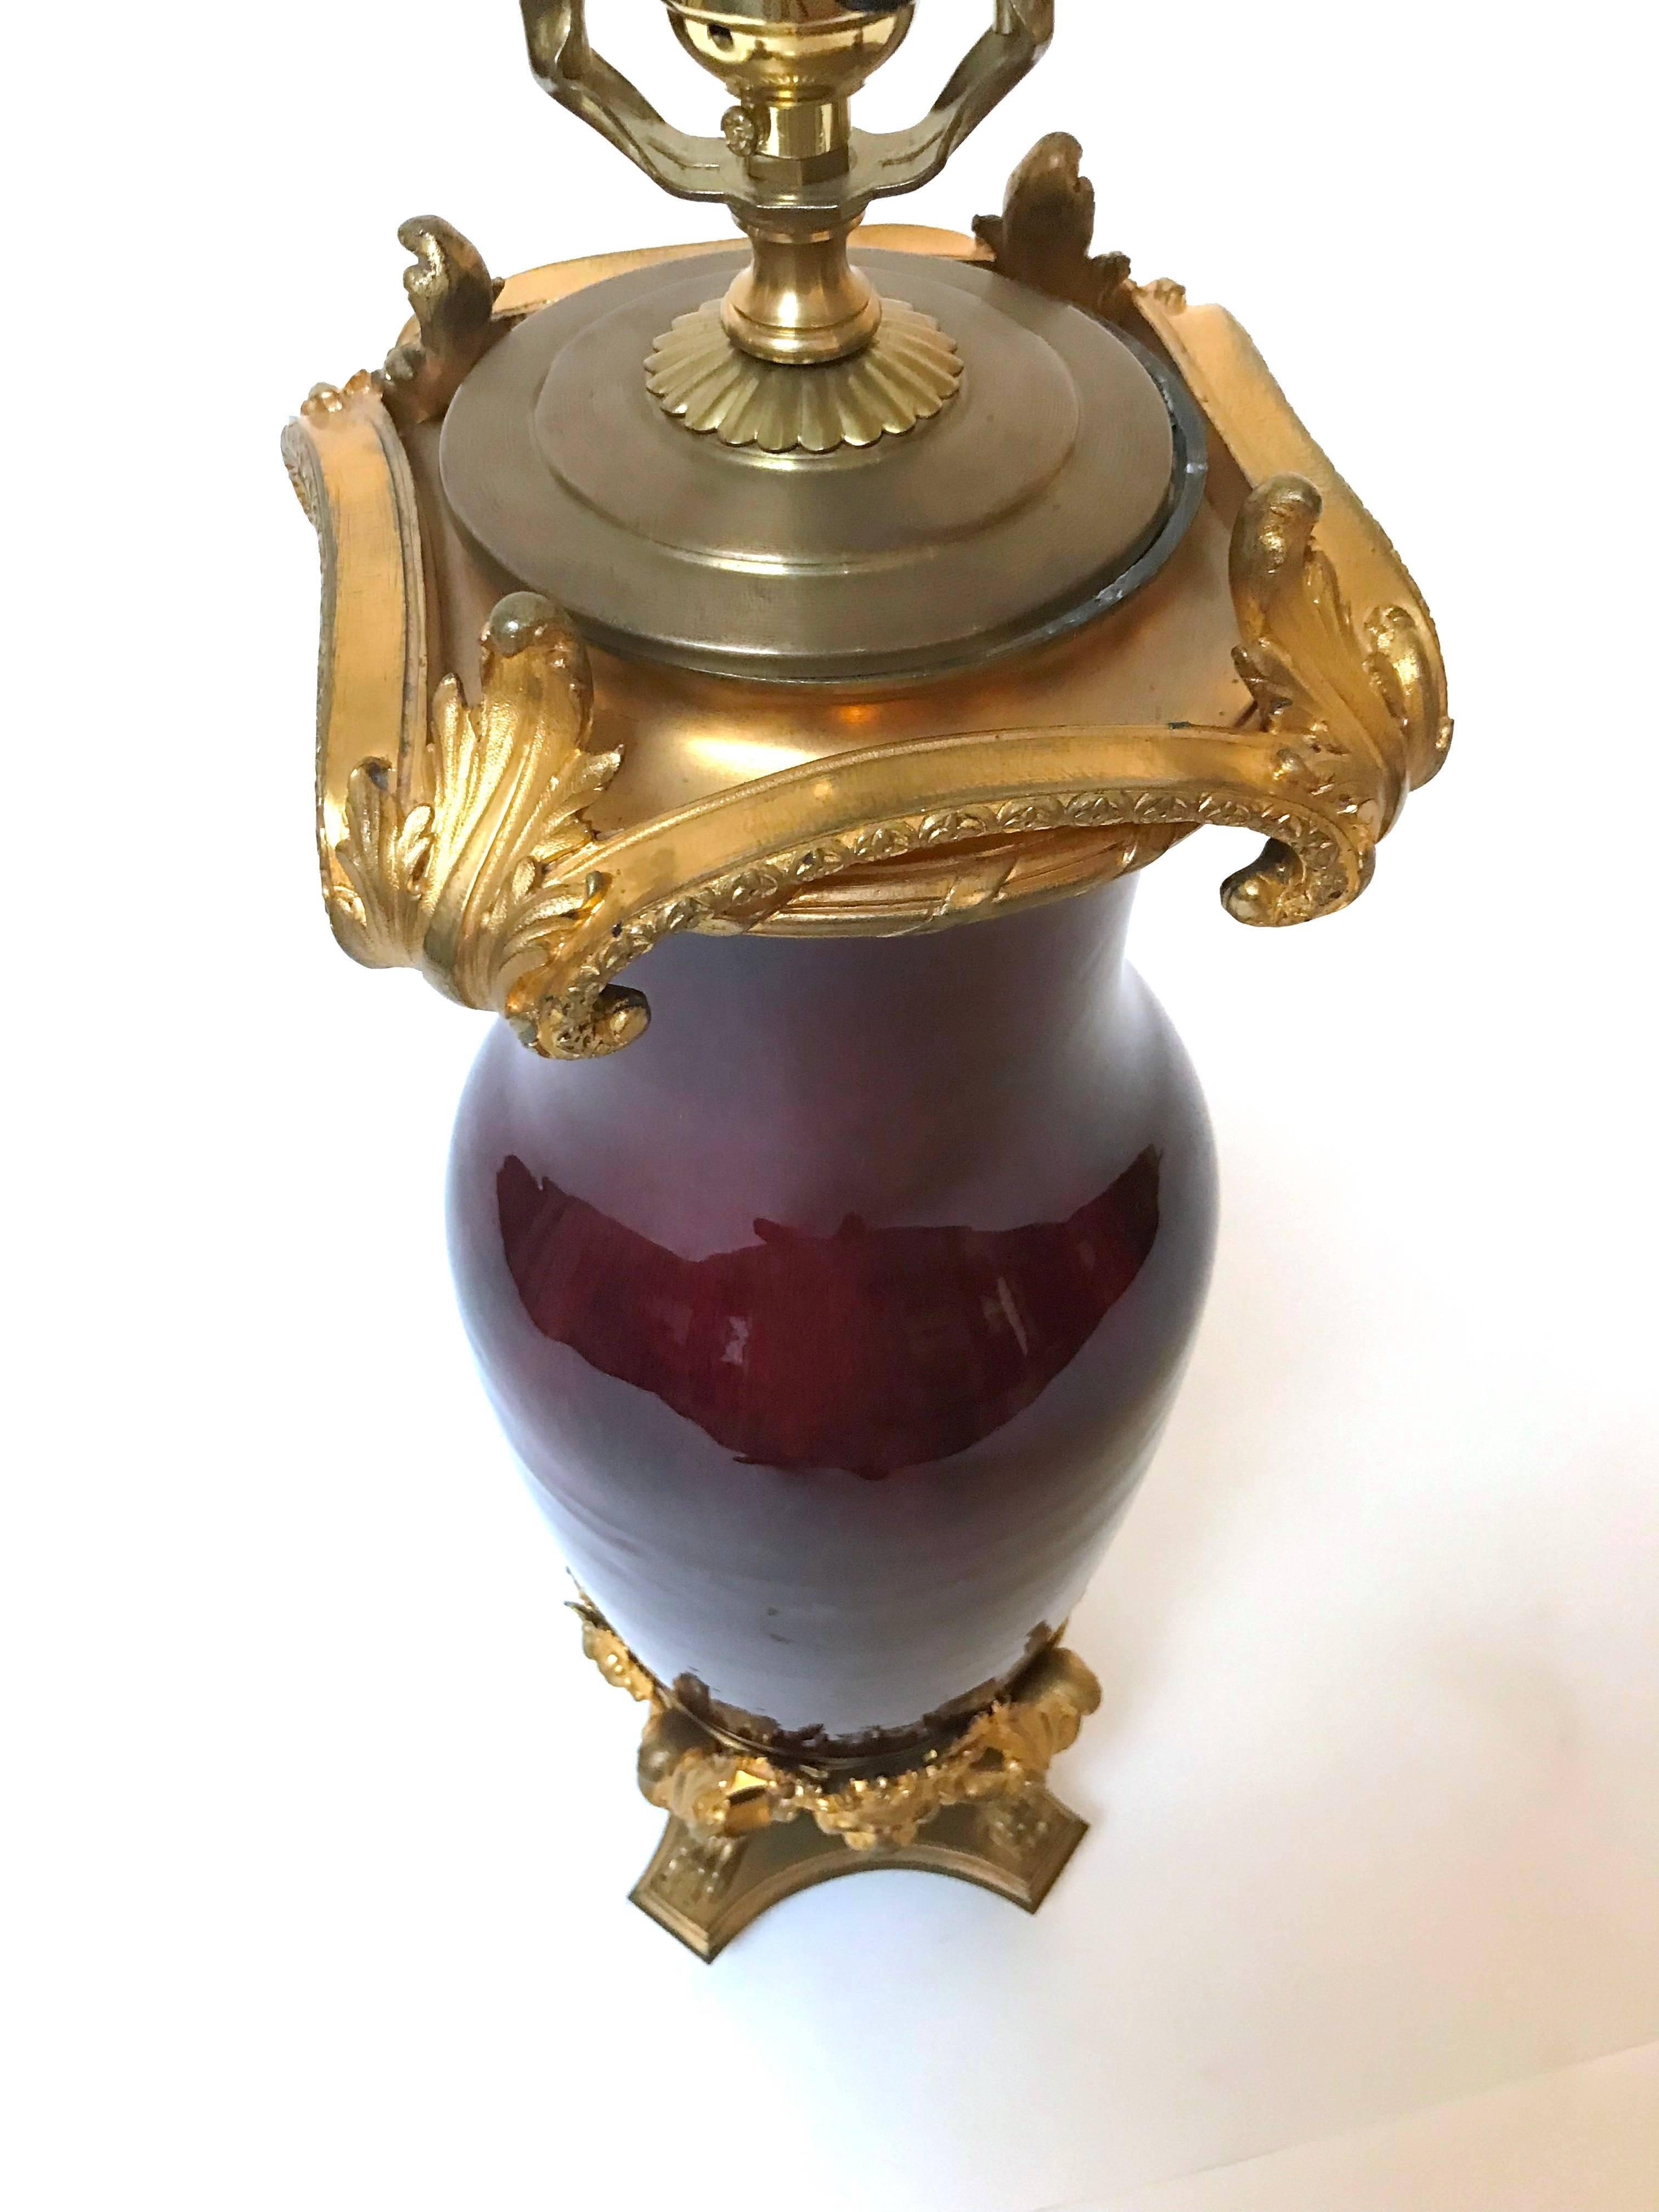 A very nice ormolu-mounted Sang de Boeuf vase with pawed feet, grotesque with ring, and acanthus scrolls, mounted in France in the 19th century, drilled for lamp in the 20th century.